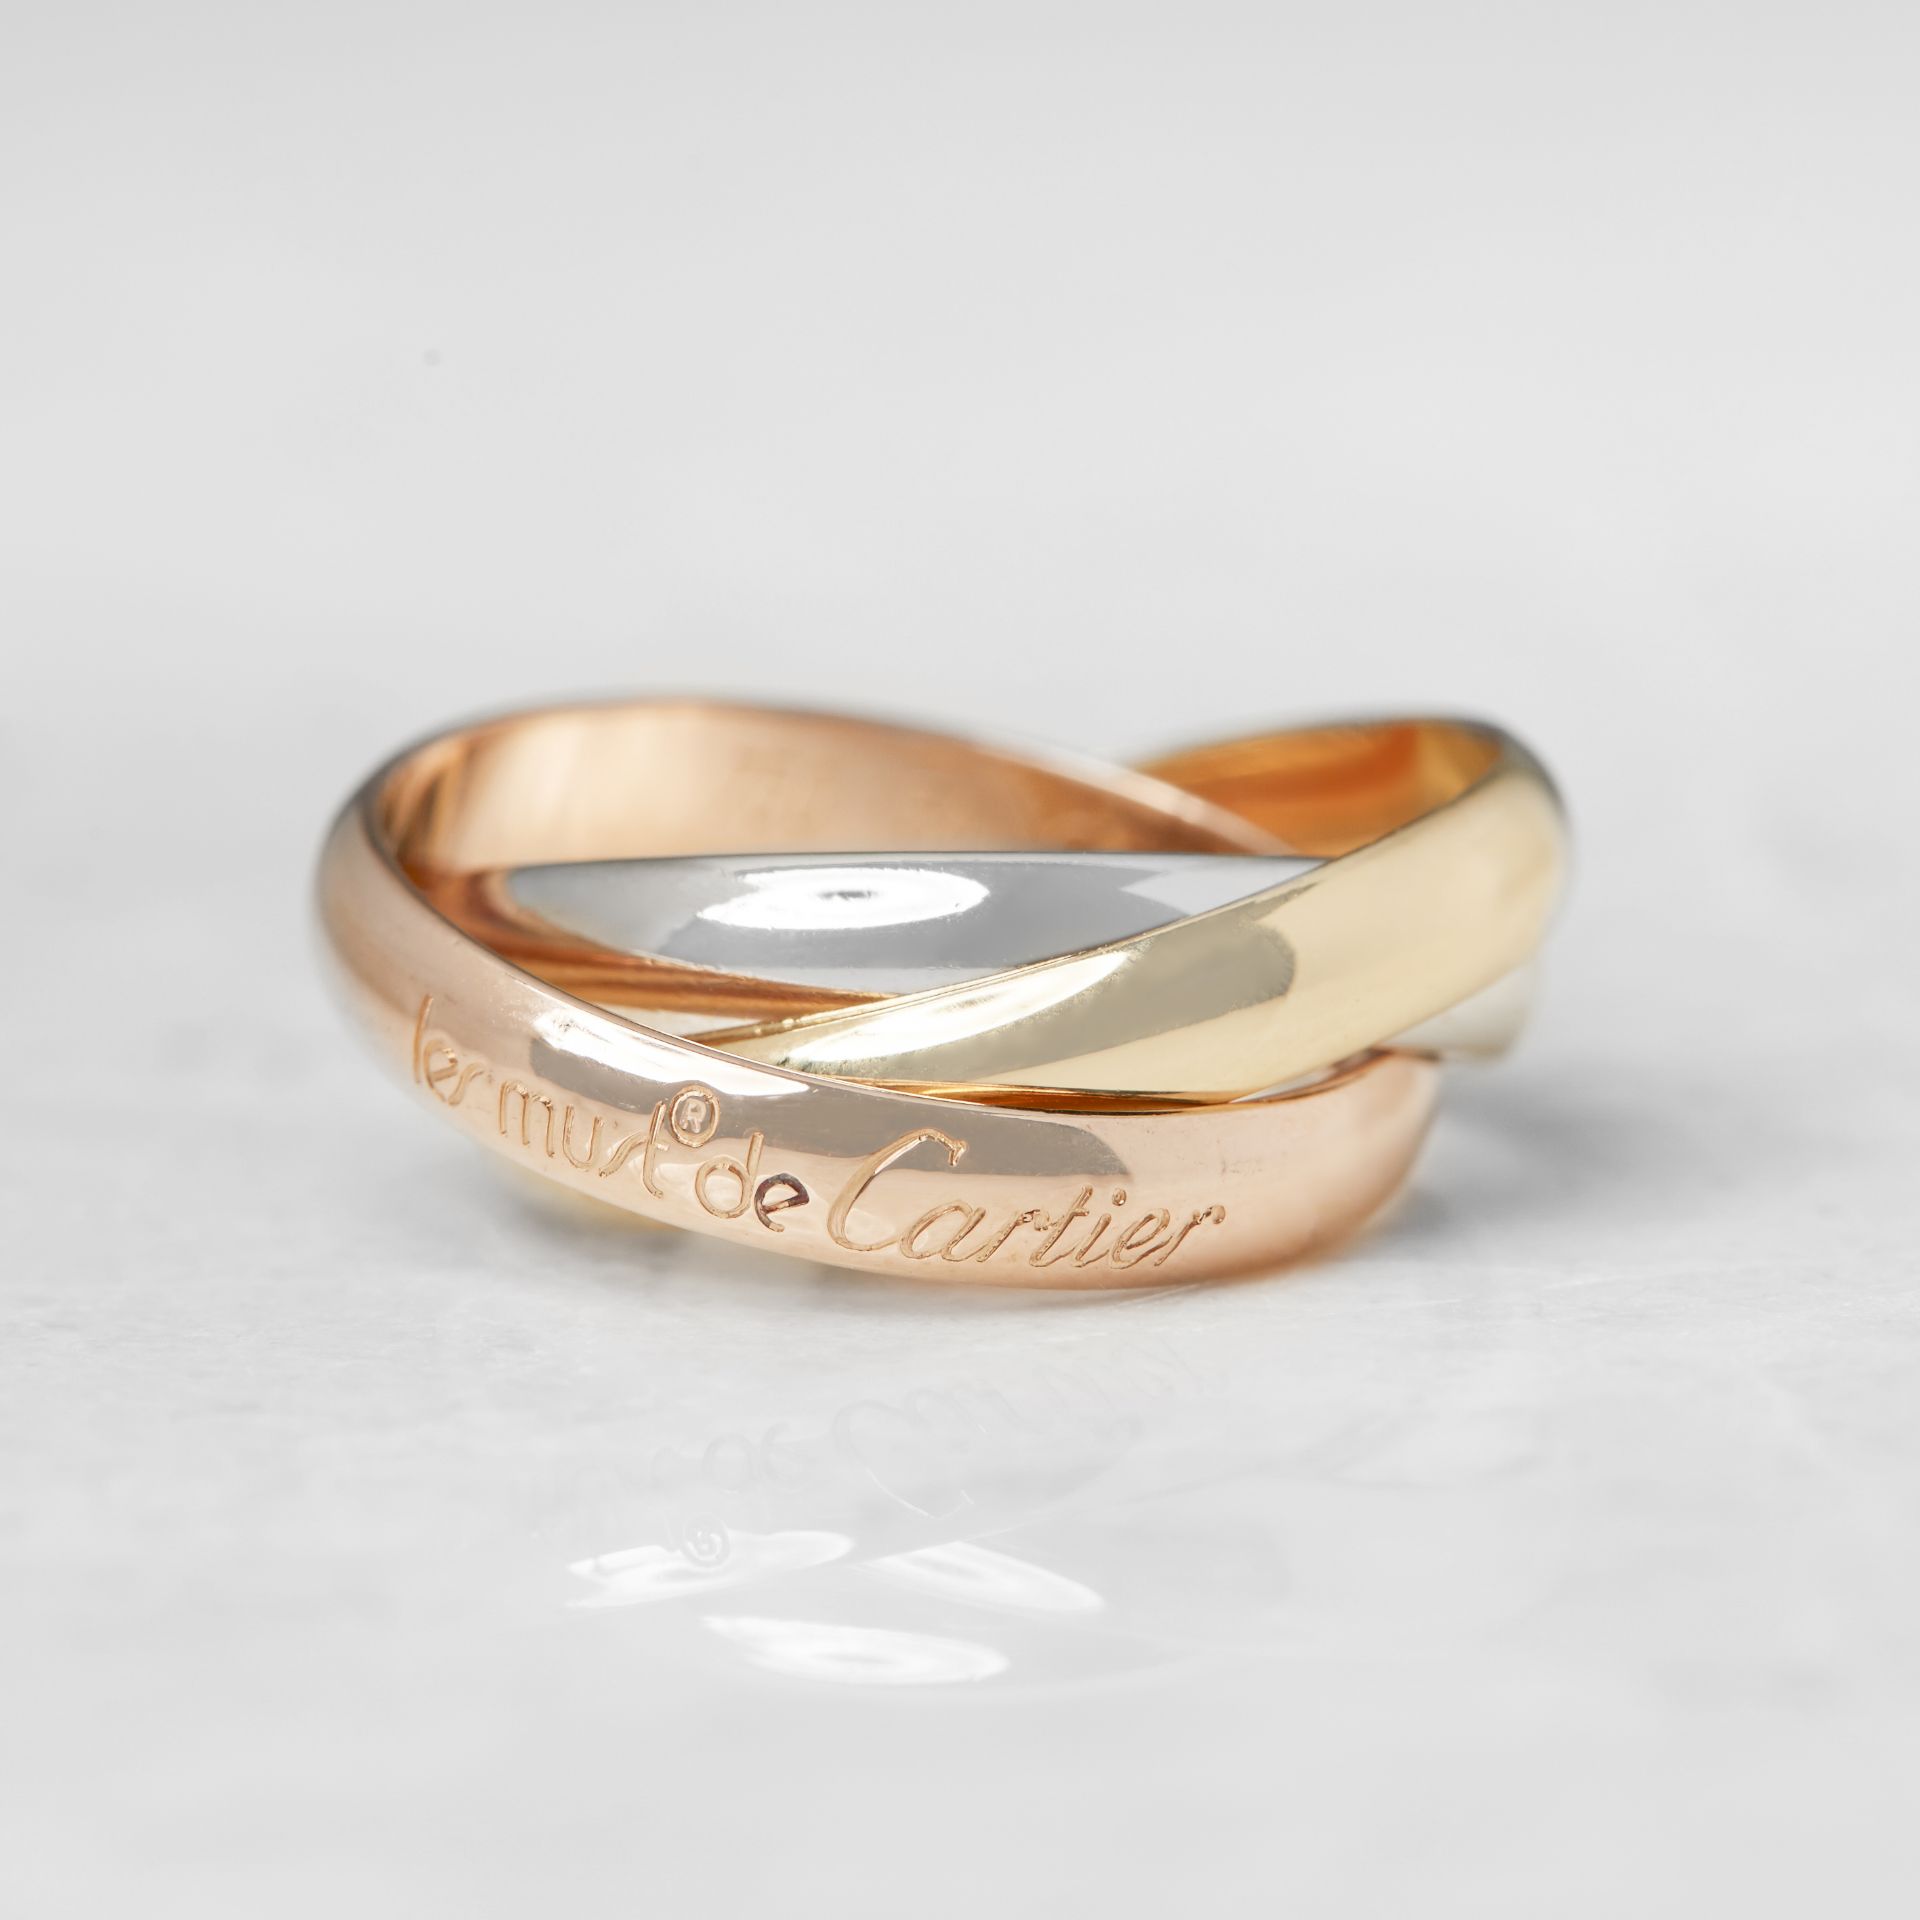 Cartier 18k Yellow, White & Rose Gold Trinity Ring - Image 11 of 18